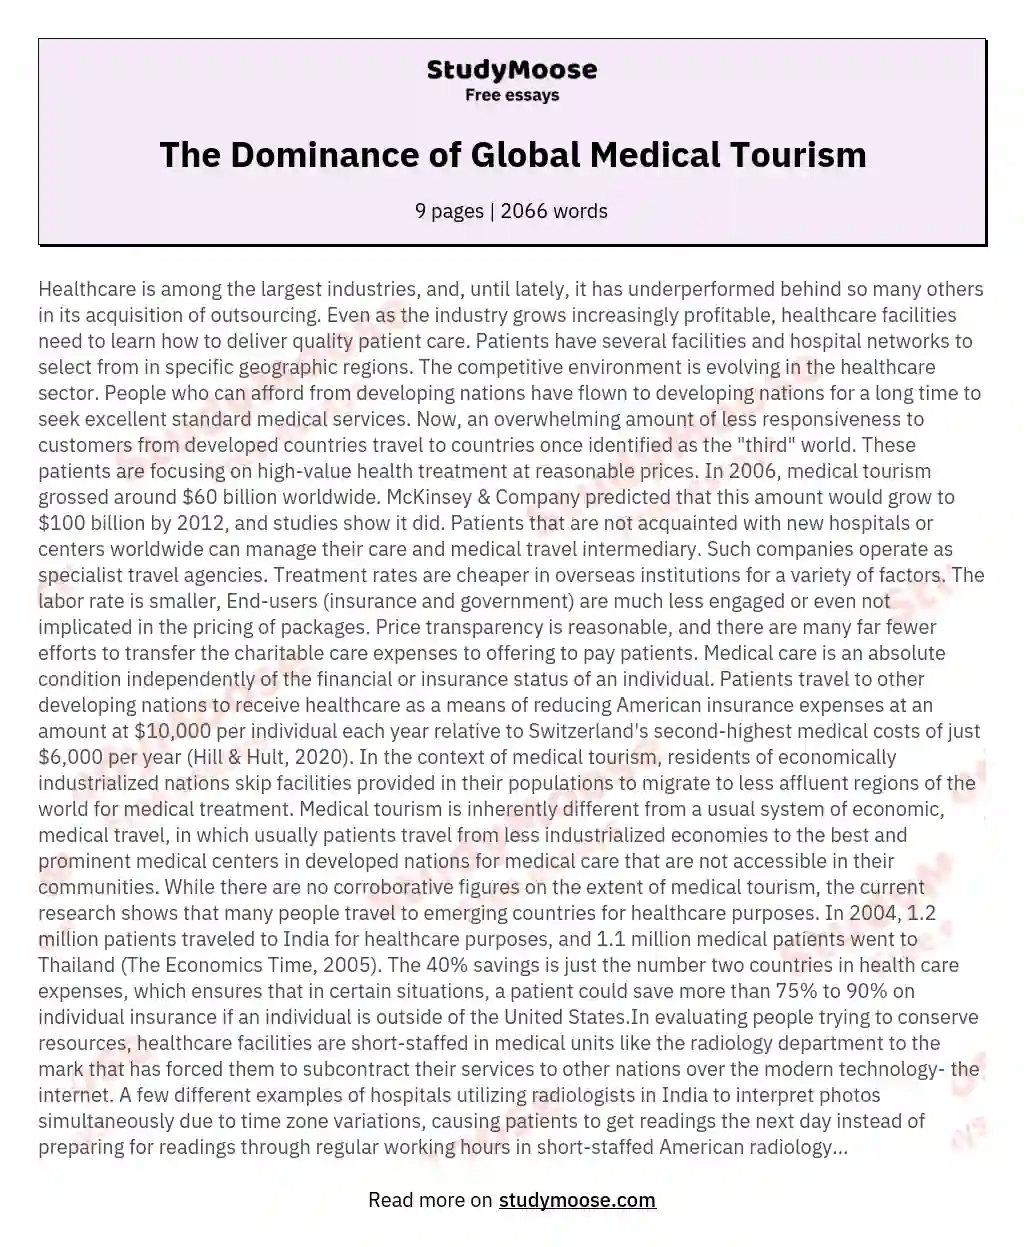 The Dominance of Global Medical Tourism essay